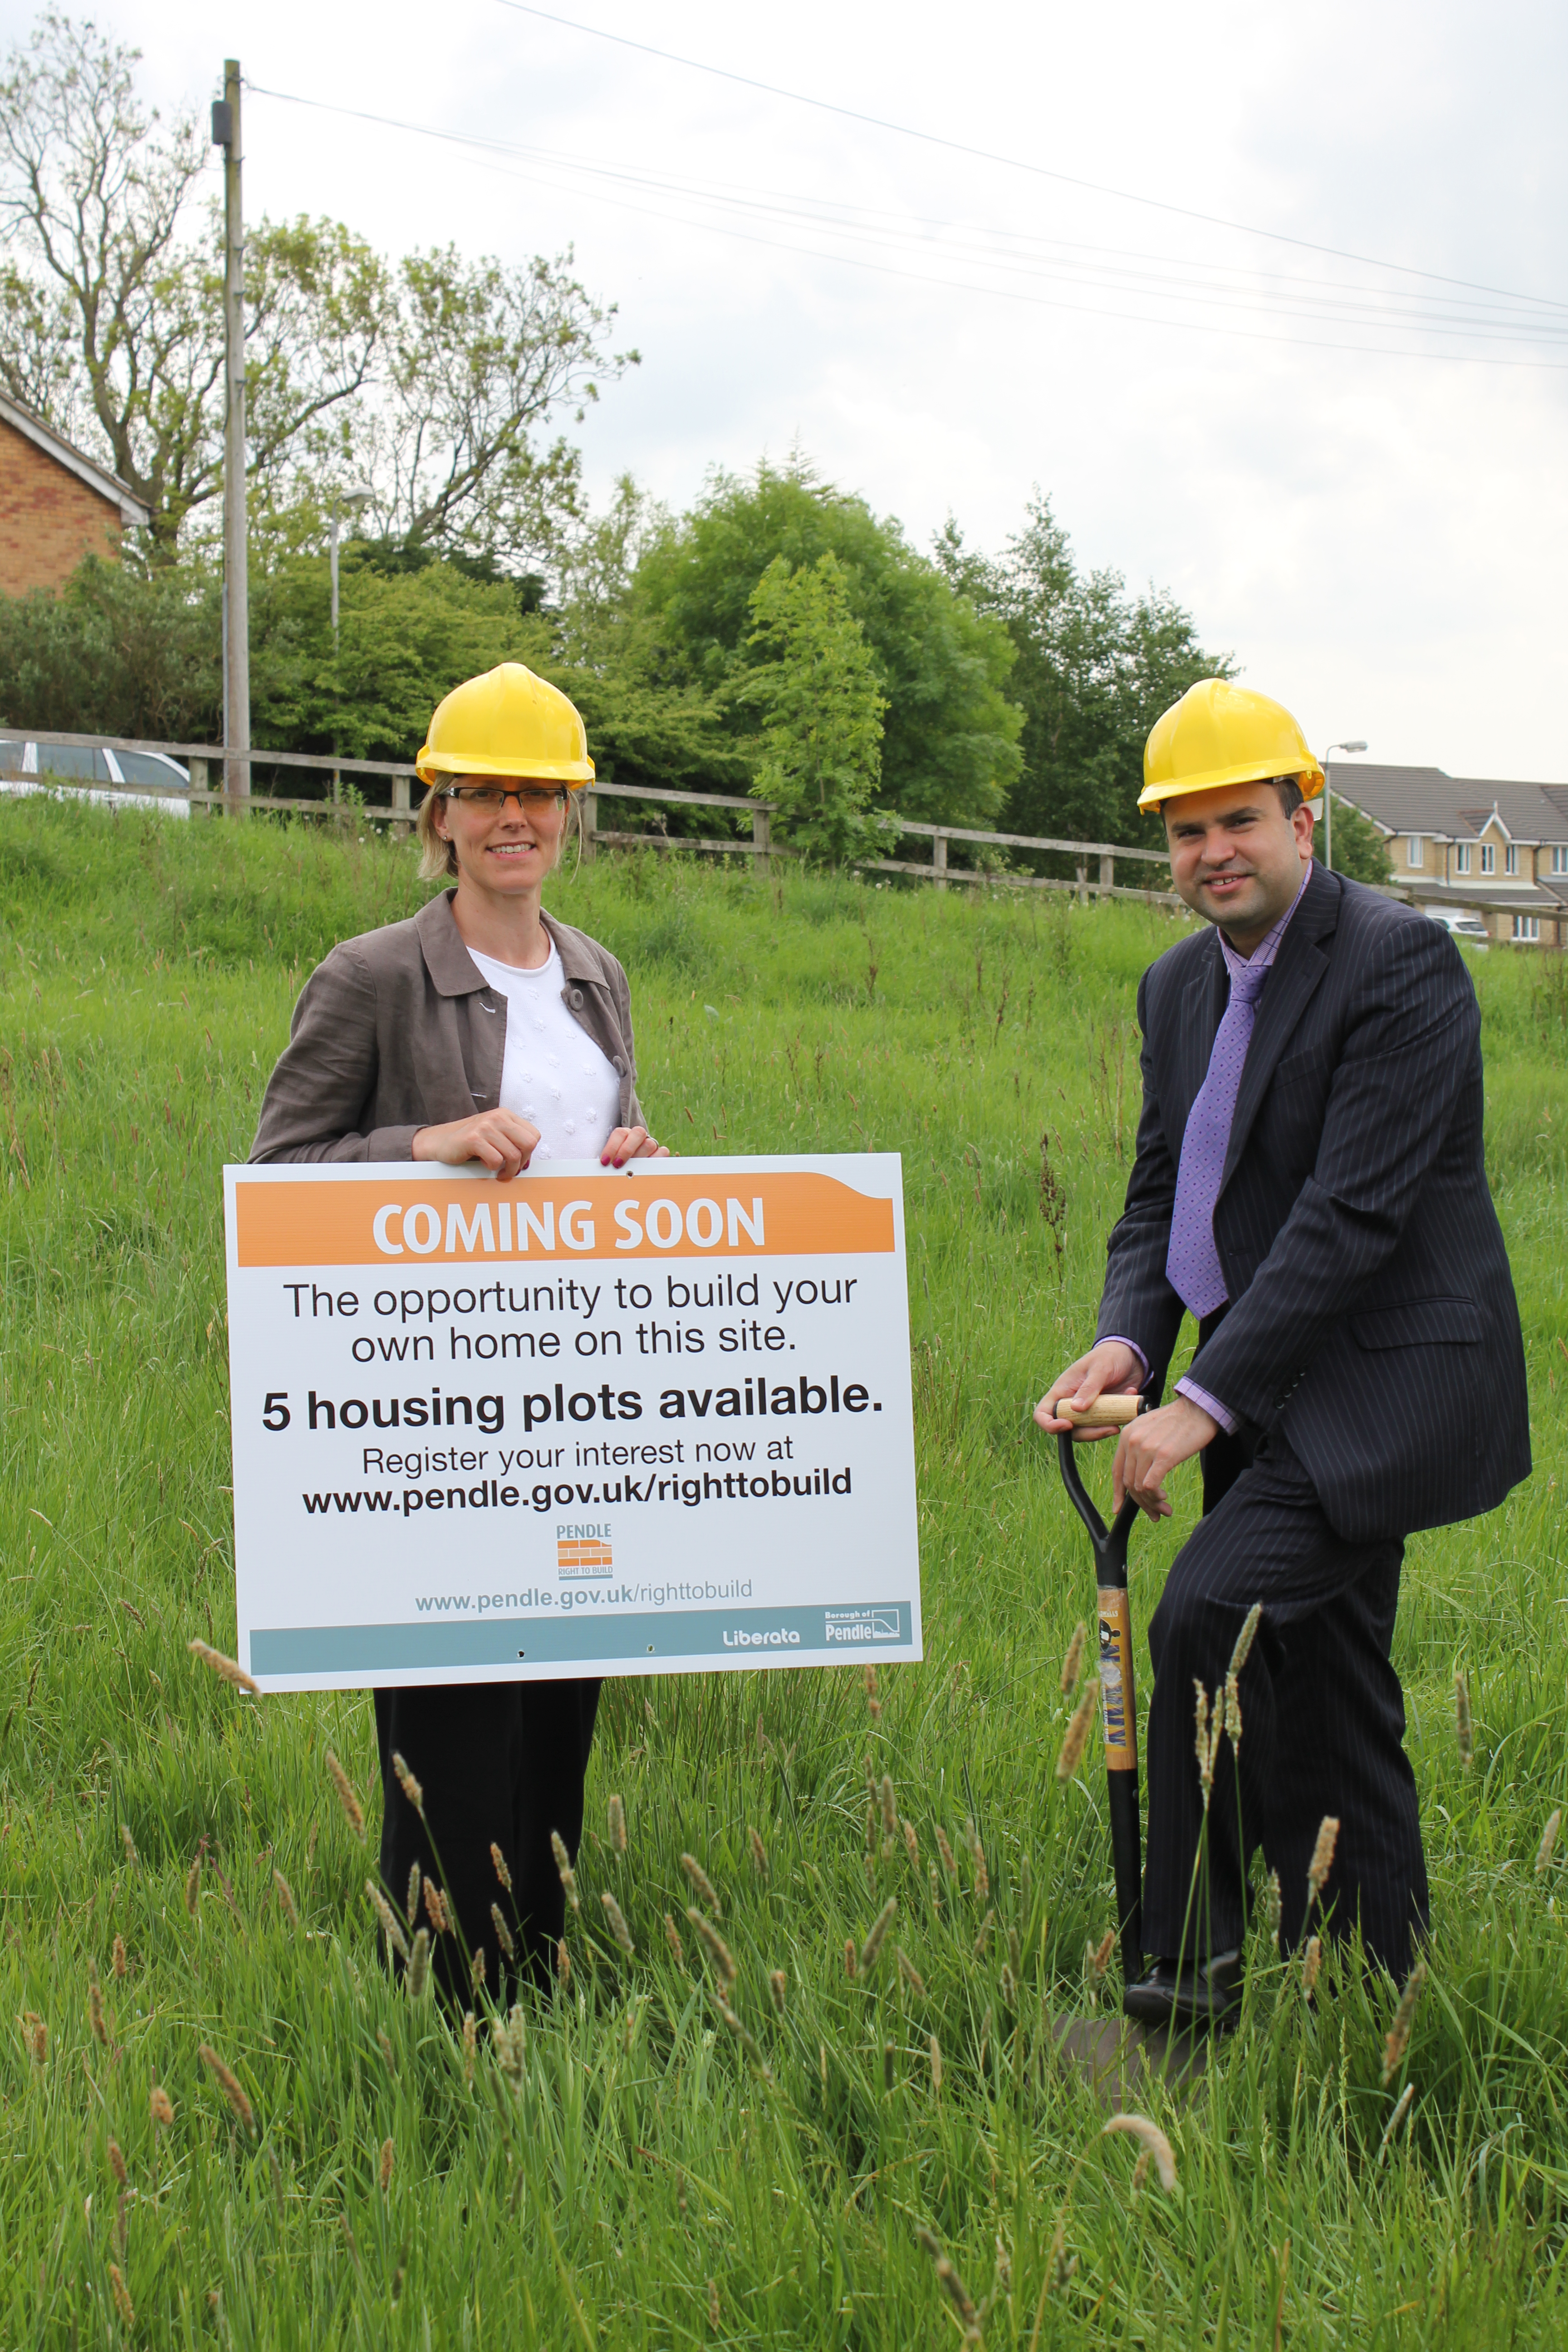 Want to build your own home in Pendle?